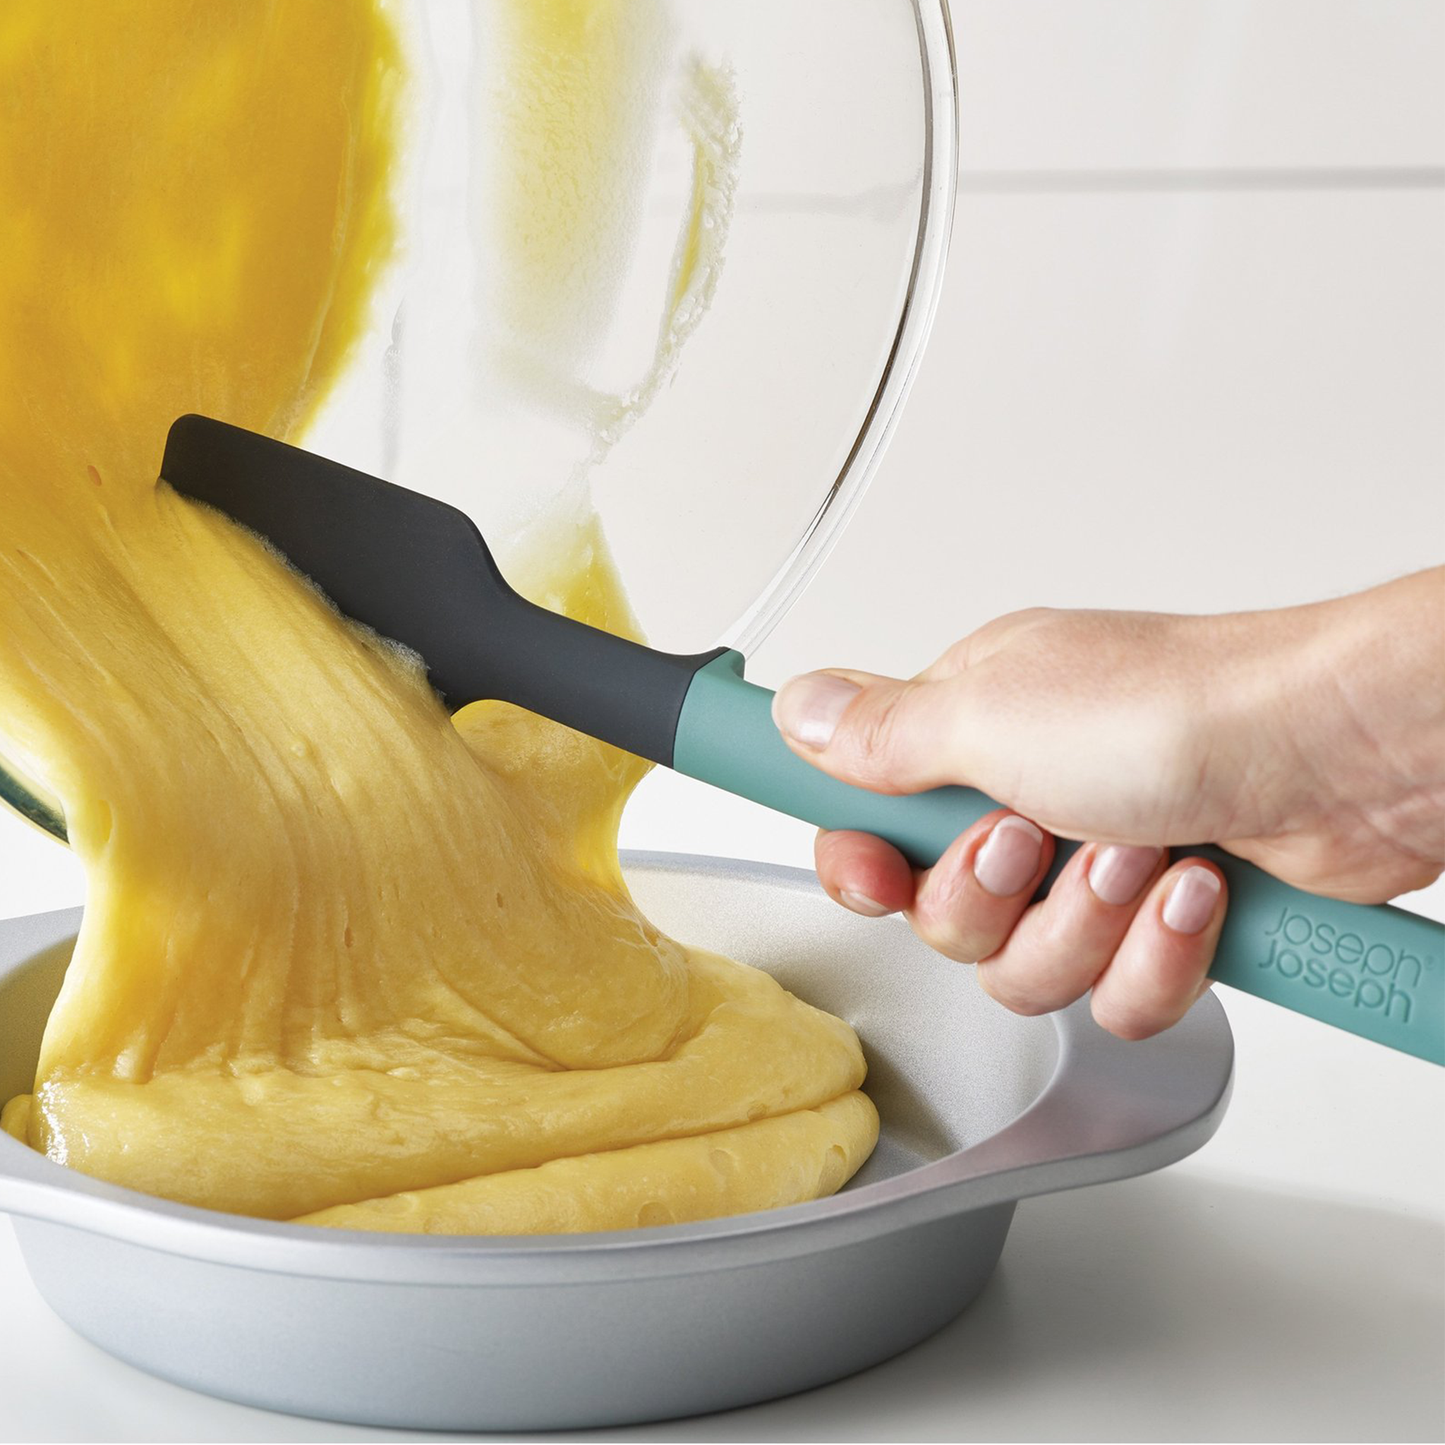 a person using the spatula to help pour cake batter from a glass mixing bowl into a cake pan